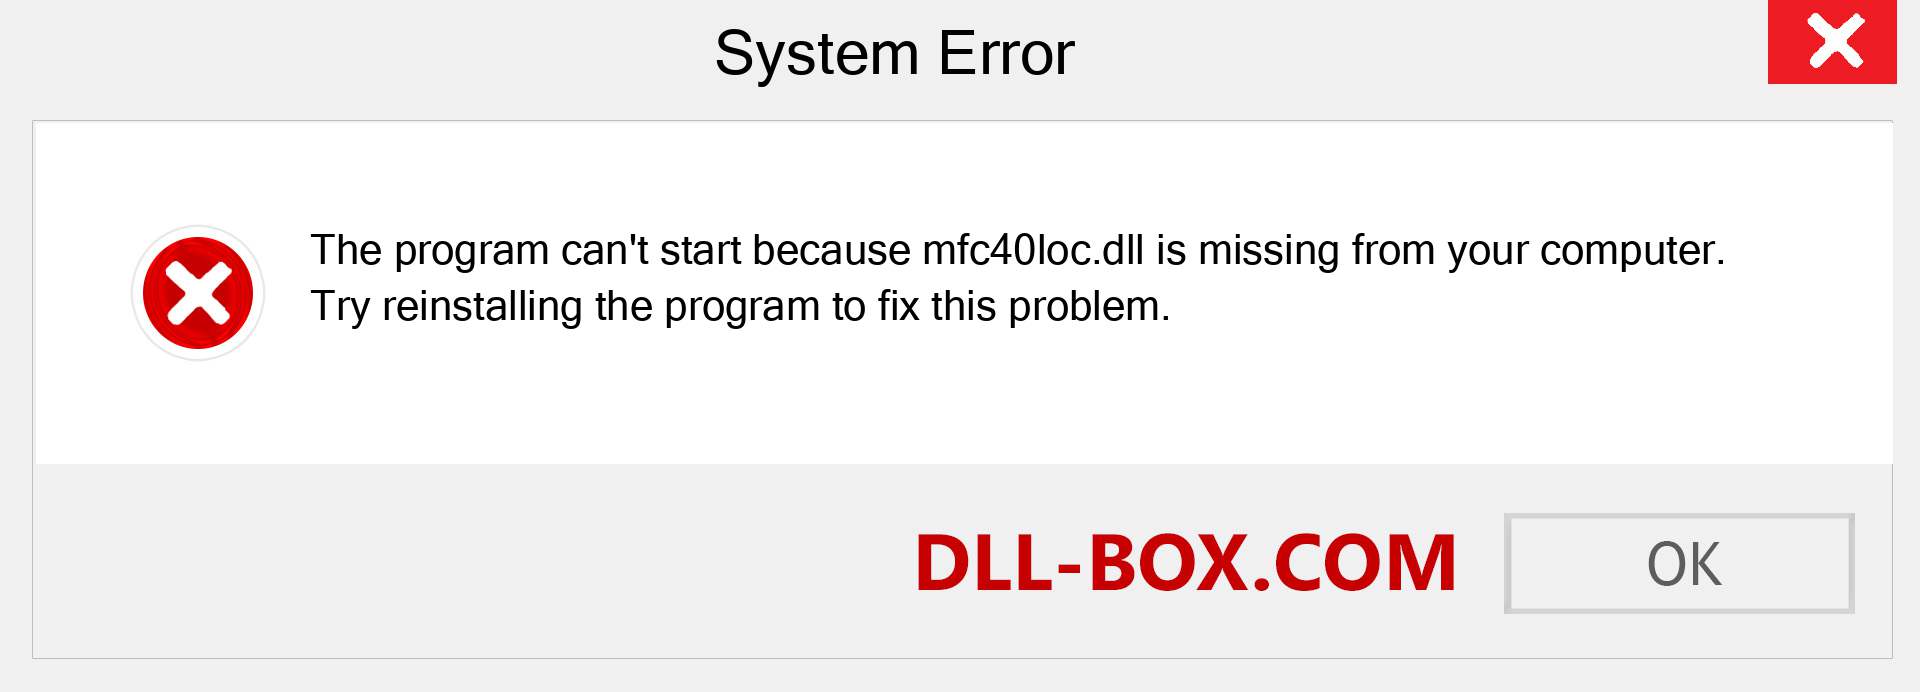  mfc40loc.dll file is missing?. Download for Windows 7, 8, 10 - Fix  mfc40loc dll Missing Error on Windows, photos, images